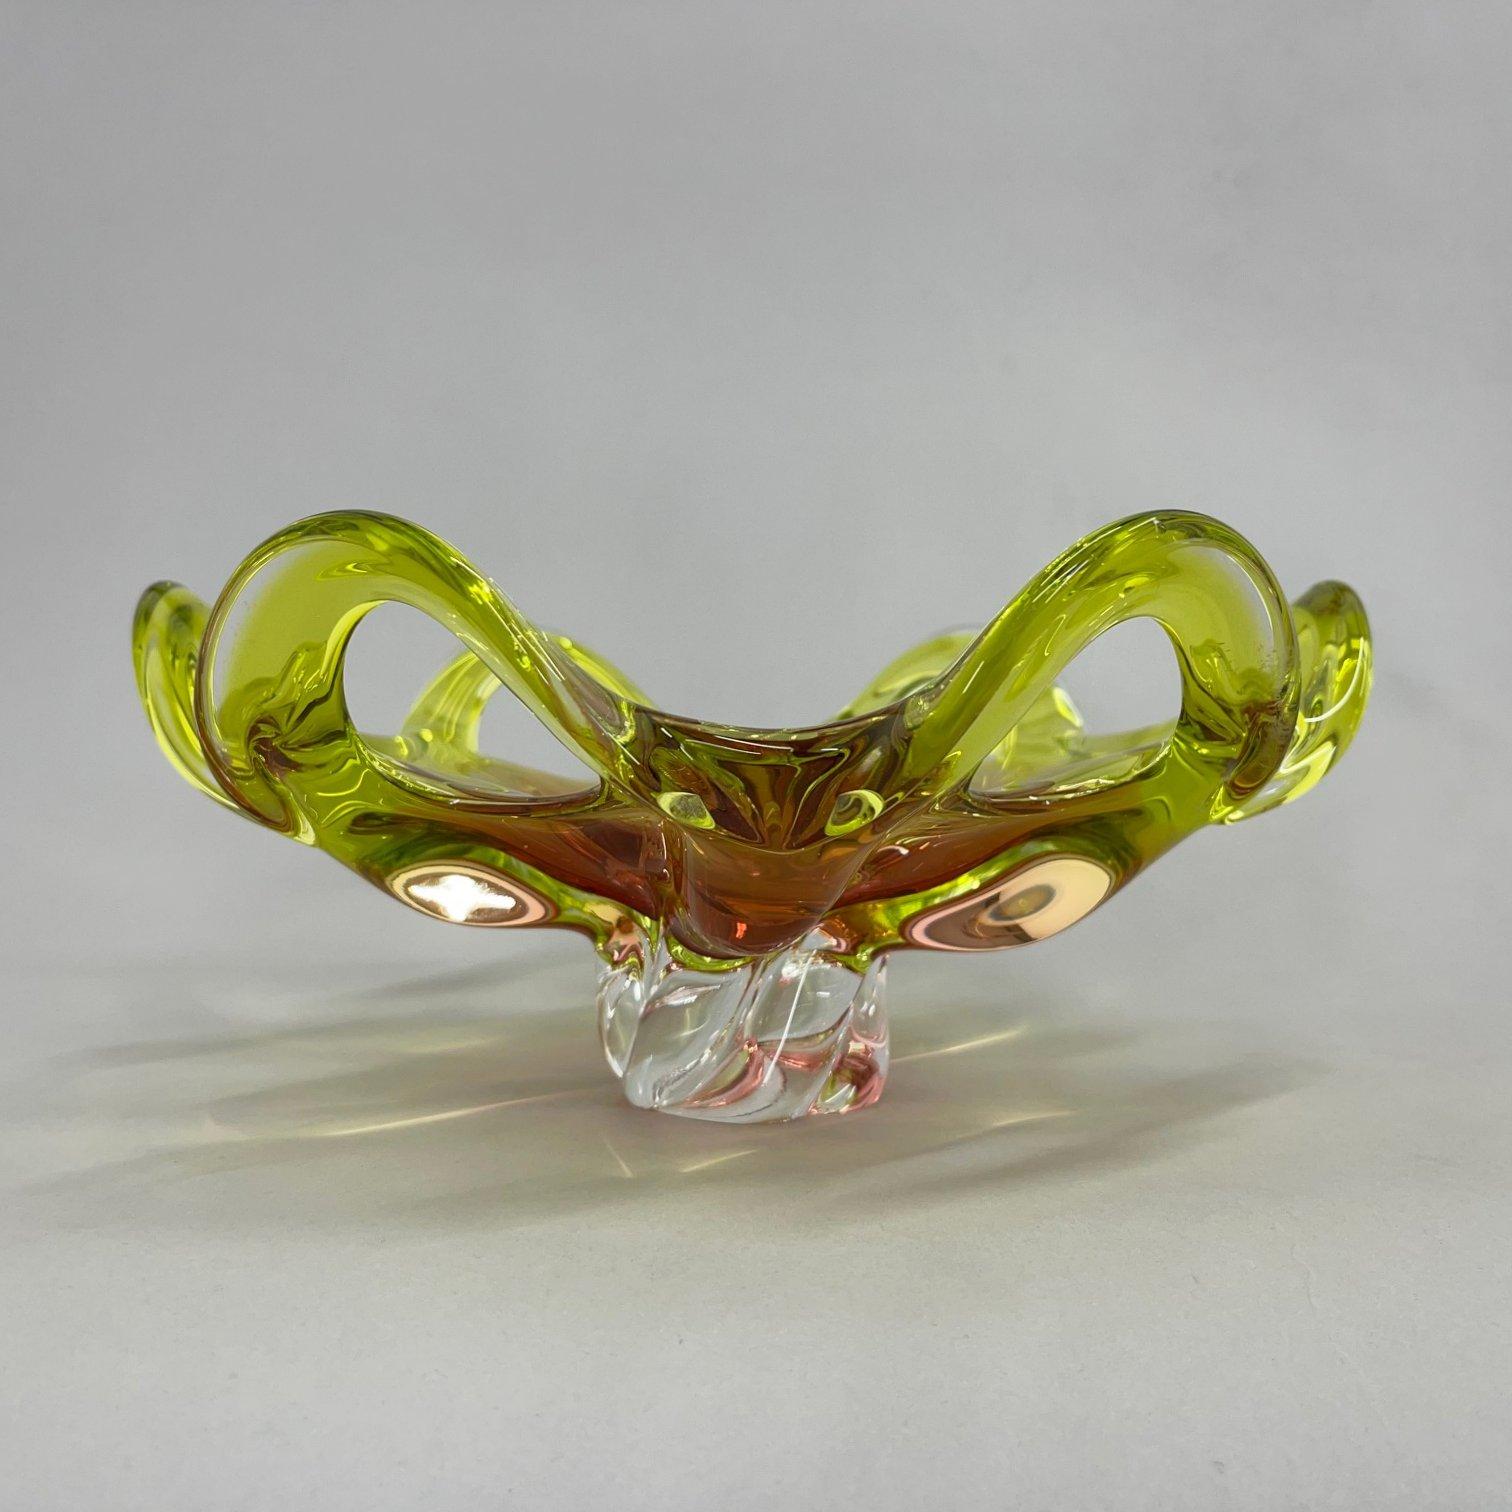 Art glass bowl designed by Josef Hospodka in the 1960's and manufactured by Chribska Glassworks in Czechoslovakia.